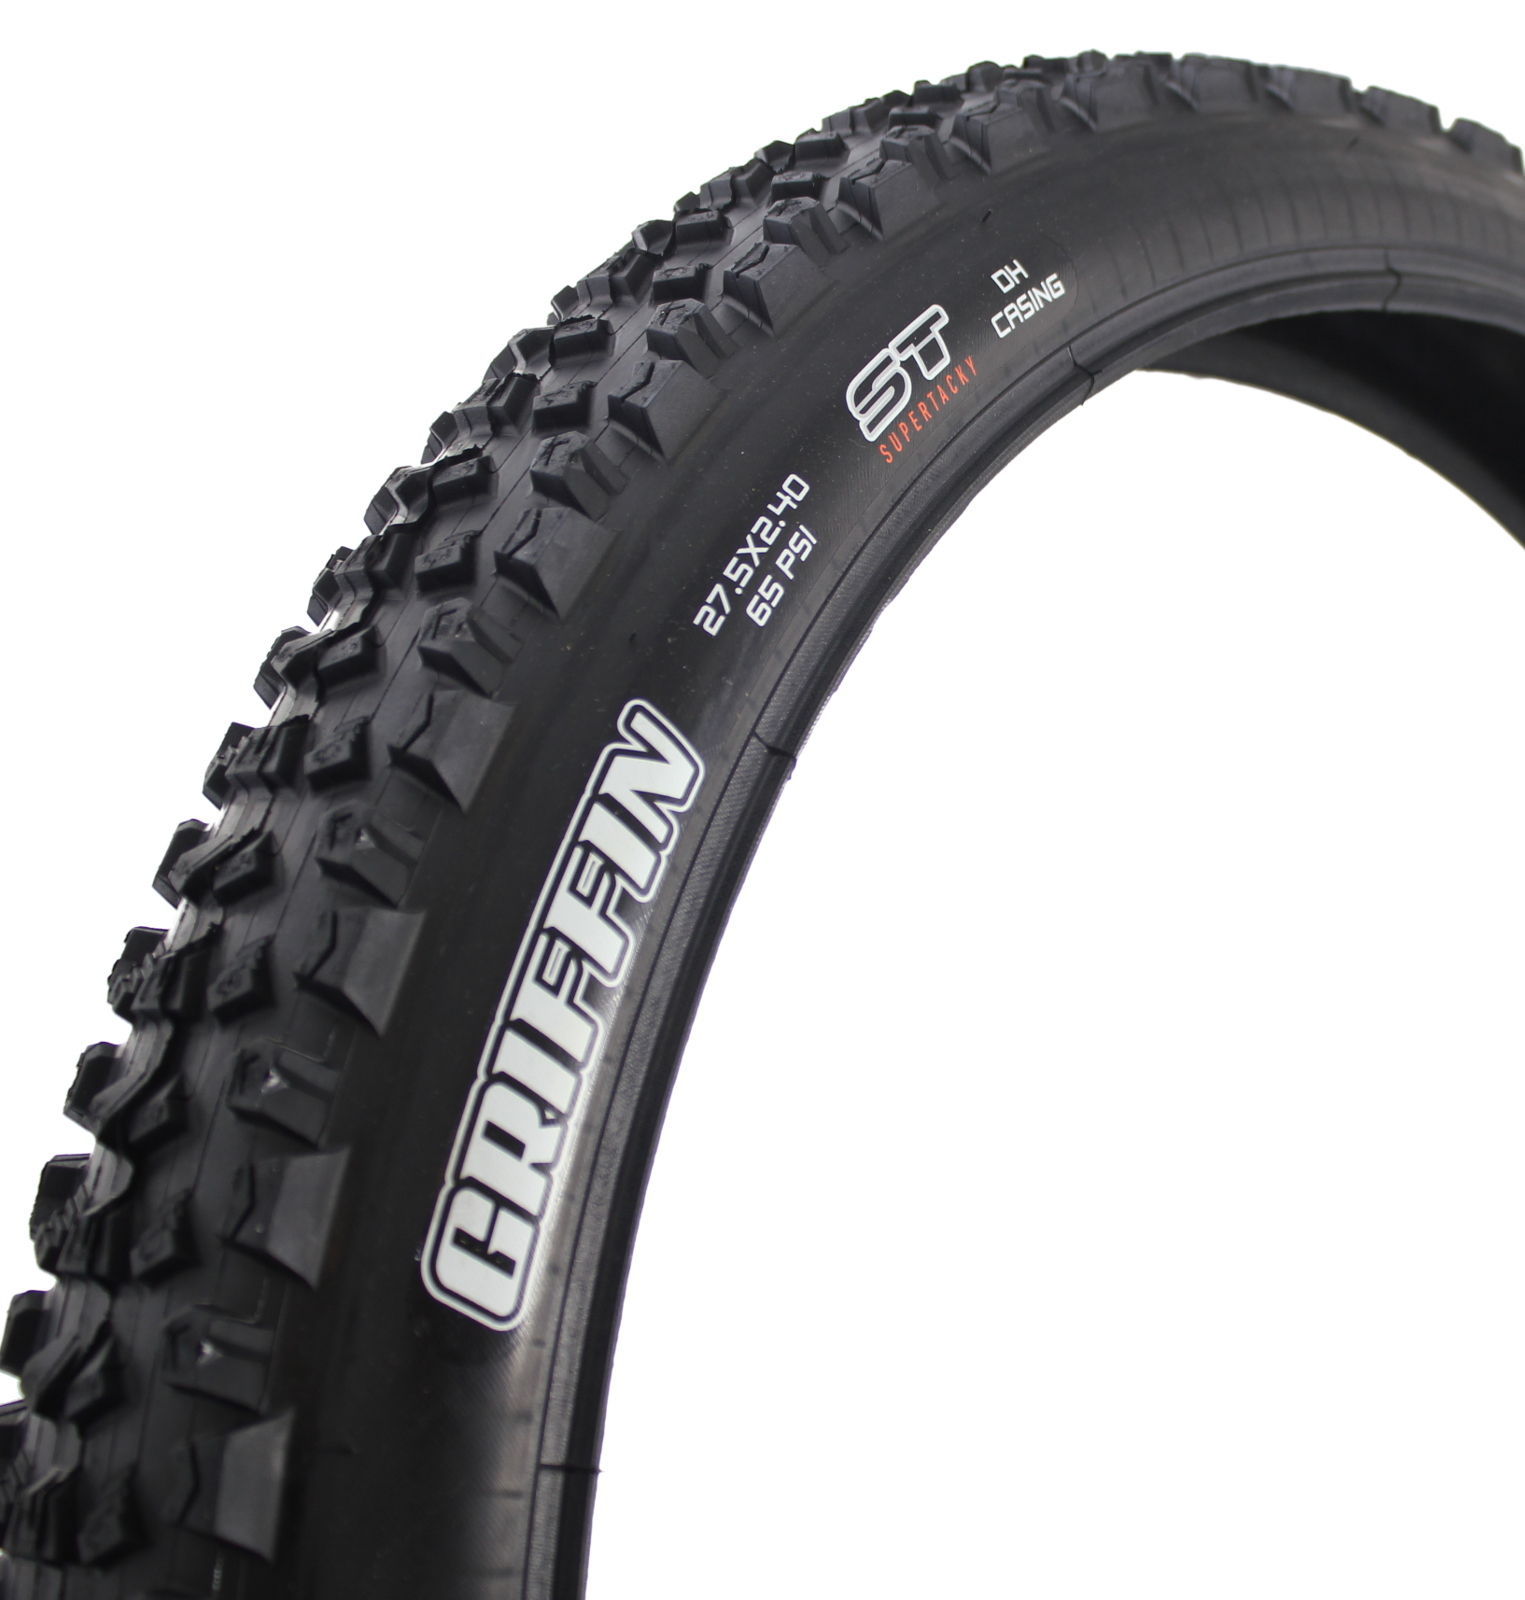 Шины maxxis sport 5 отзывы. Maxxis Griffin 26 2.4. Maxxis Griffin DH. Покрышки Максис 26 DH. Покрышки Maxxis 27.5.